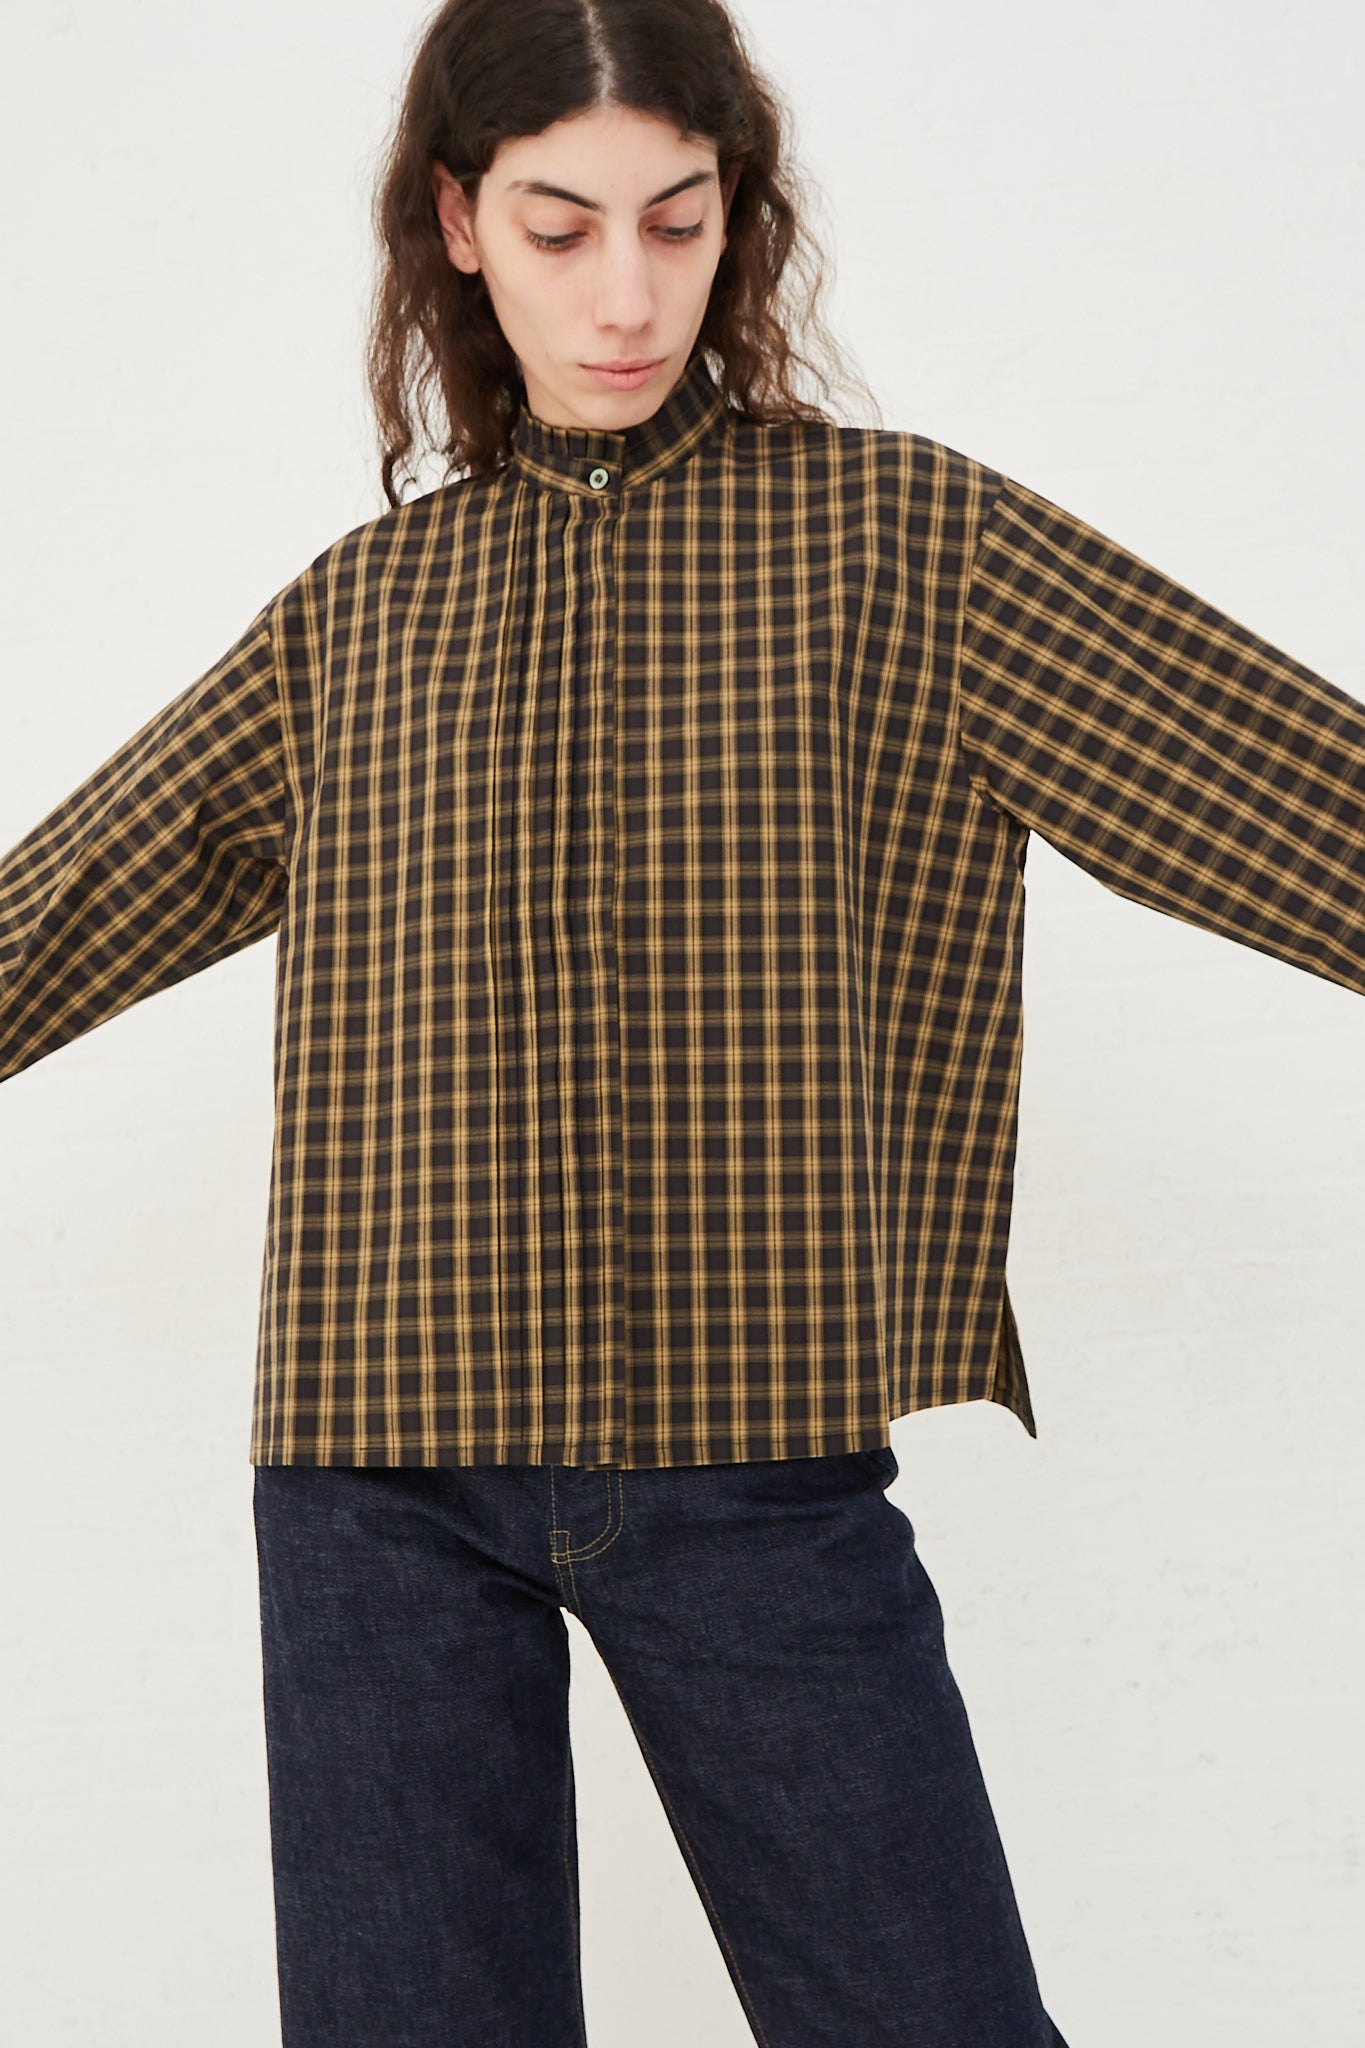 CHIMALA Pleated Stand Collar Shirt in Yellow Check - Oroboro Store | Front view and up close. Model's arms raised to the side.